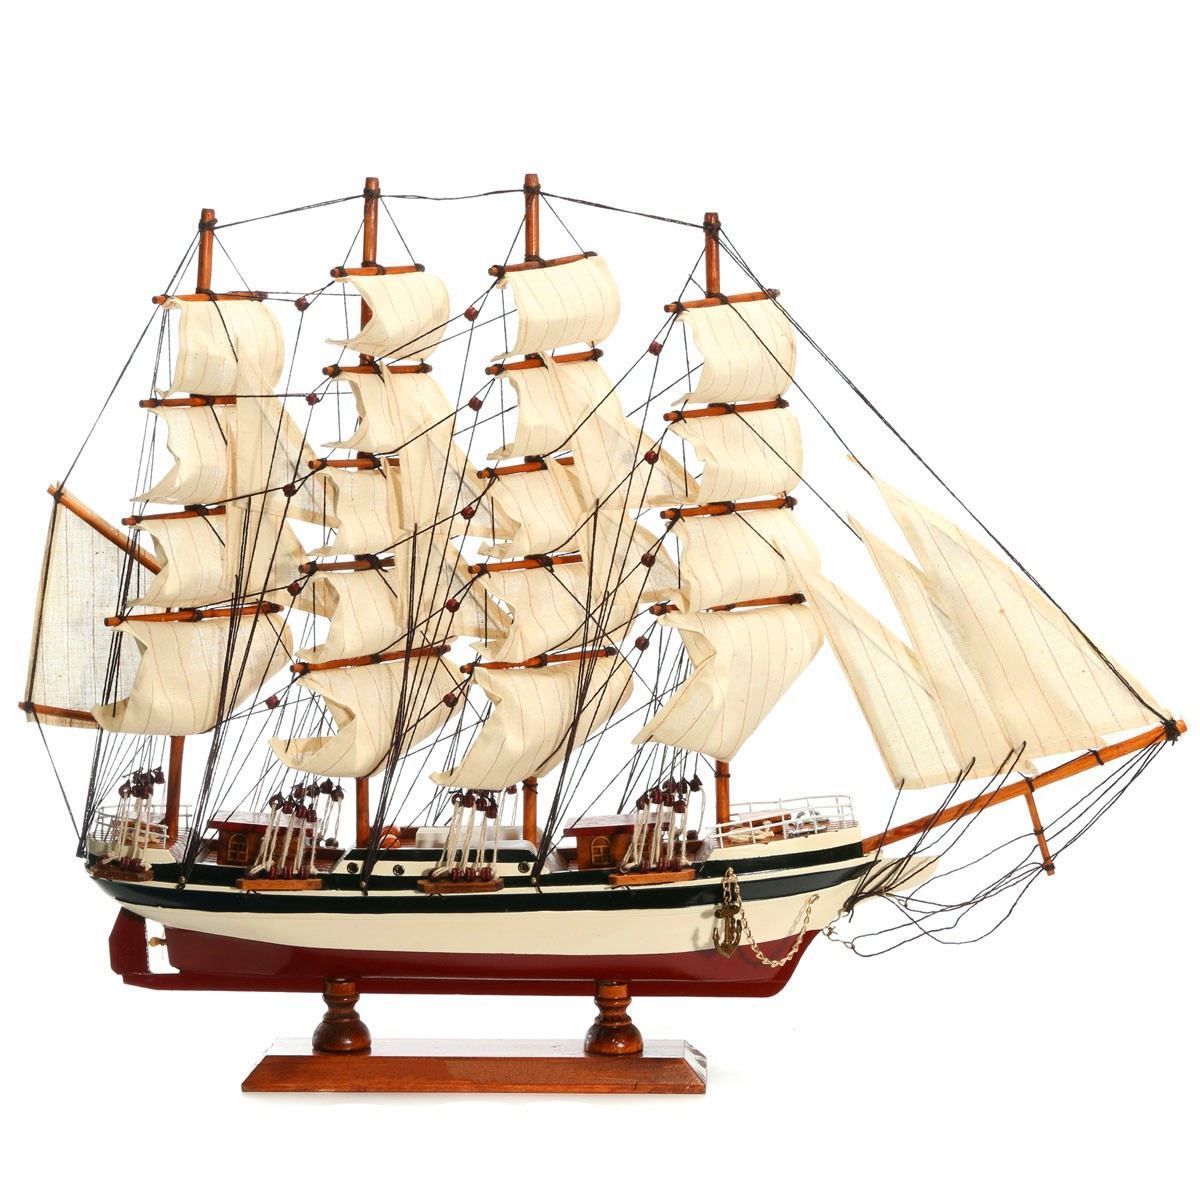 Diy Handmade Assembly Ship Craft Wooden Sailing Boat Wood Sailboat In Most Current Metal Alloy Boat Wall Decor (View 5 of 20)